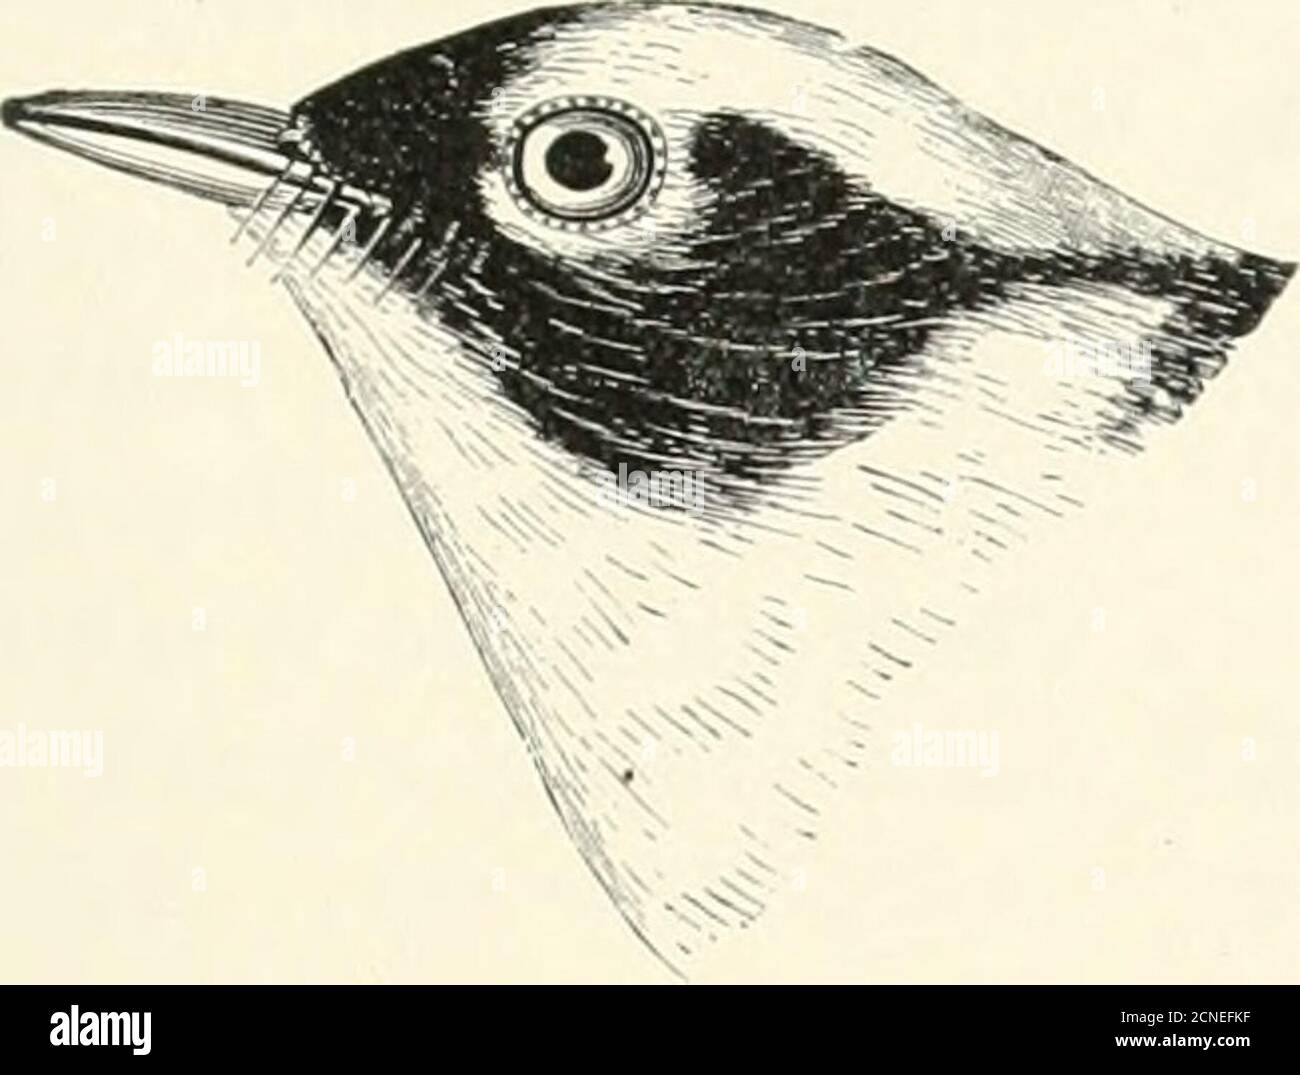 . The birds of Illinois and Wisconsin . Jan., 1909. Birds of Illinois and Wisconsin — Cory. 251. Throat and sides, chestnut; crown,chestnut. Dendroica castanea {adult male).Bay-breasted Warbler.See No. 317. Throat and sides, more or less marked with chestnut; crown, ohvegreen, streaked with black; back, grayish ohve, streaked with black;(crown, with indications of chestnut); belly, cream white. Dendroica castanea {female).Bay-breasted Warbler.See No. 317. Throat and under parts, cream white, shading into pale buff; whiteon flanks; crown and back, green, indistinctly streaked with black; wing b Stock Photo